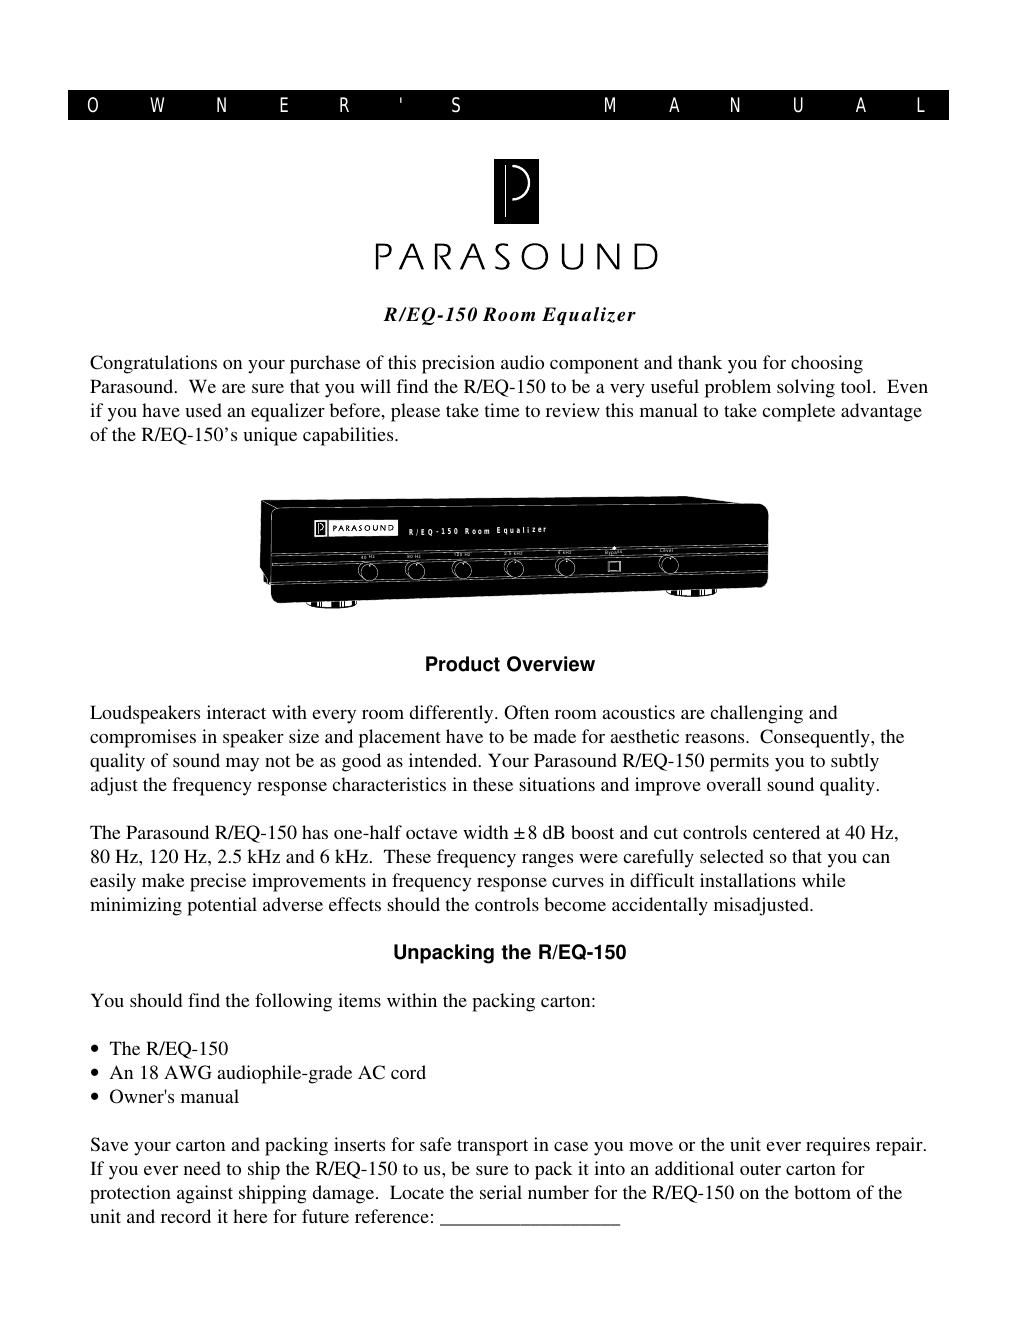 parasound req 150 owners manual